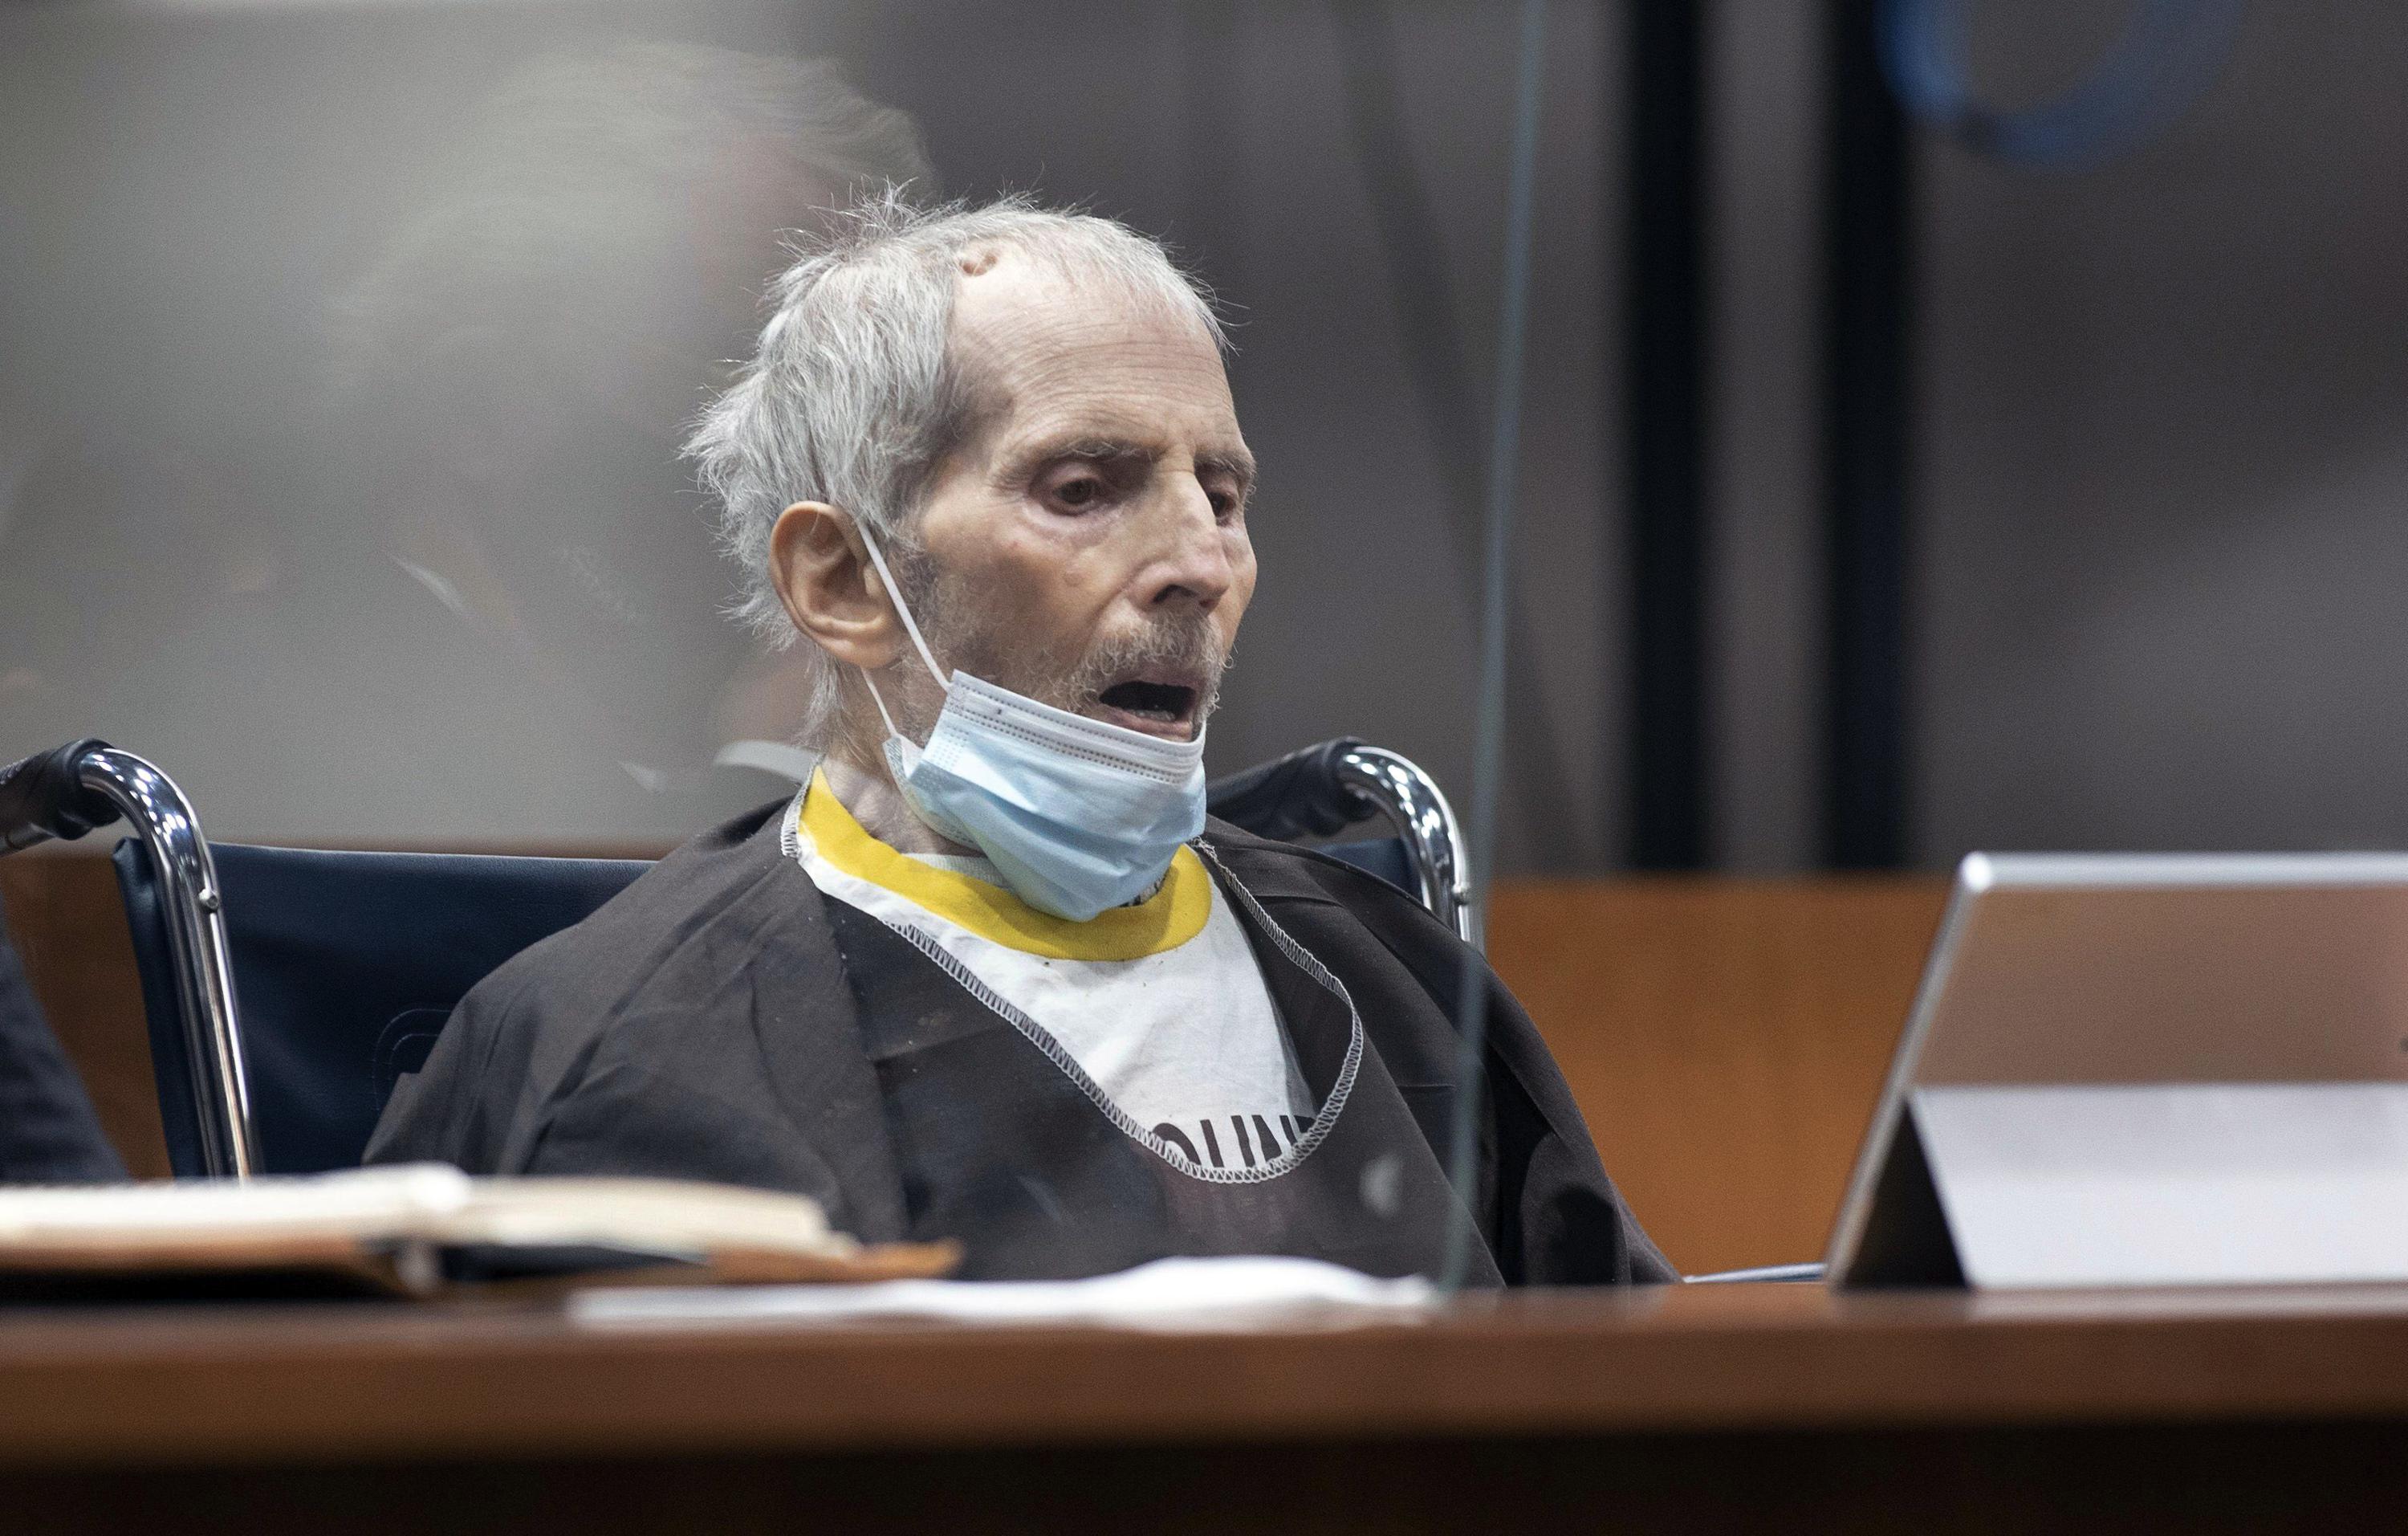 Robert Durst charged with 1982 murder of wife Kathie Durst - Associated Press